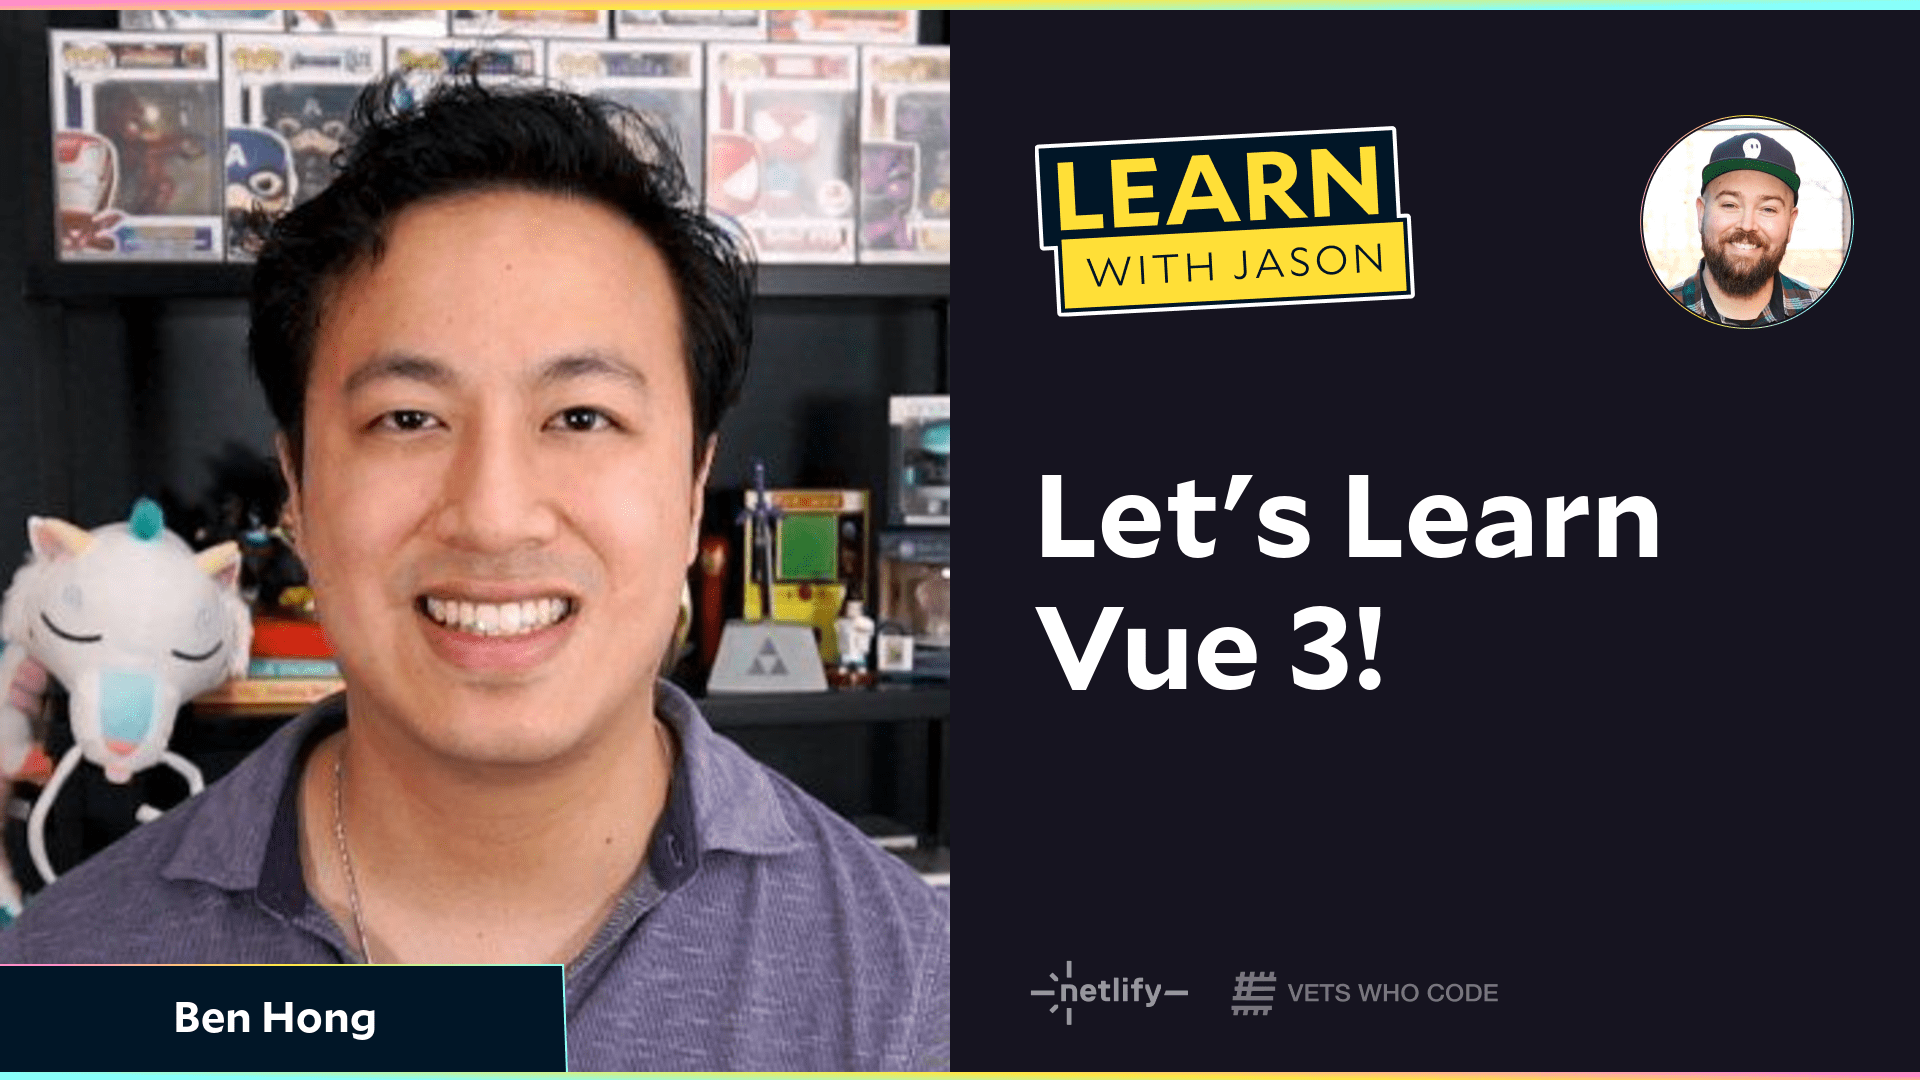 Let's Learn Vue 3! (with Ben Hong)